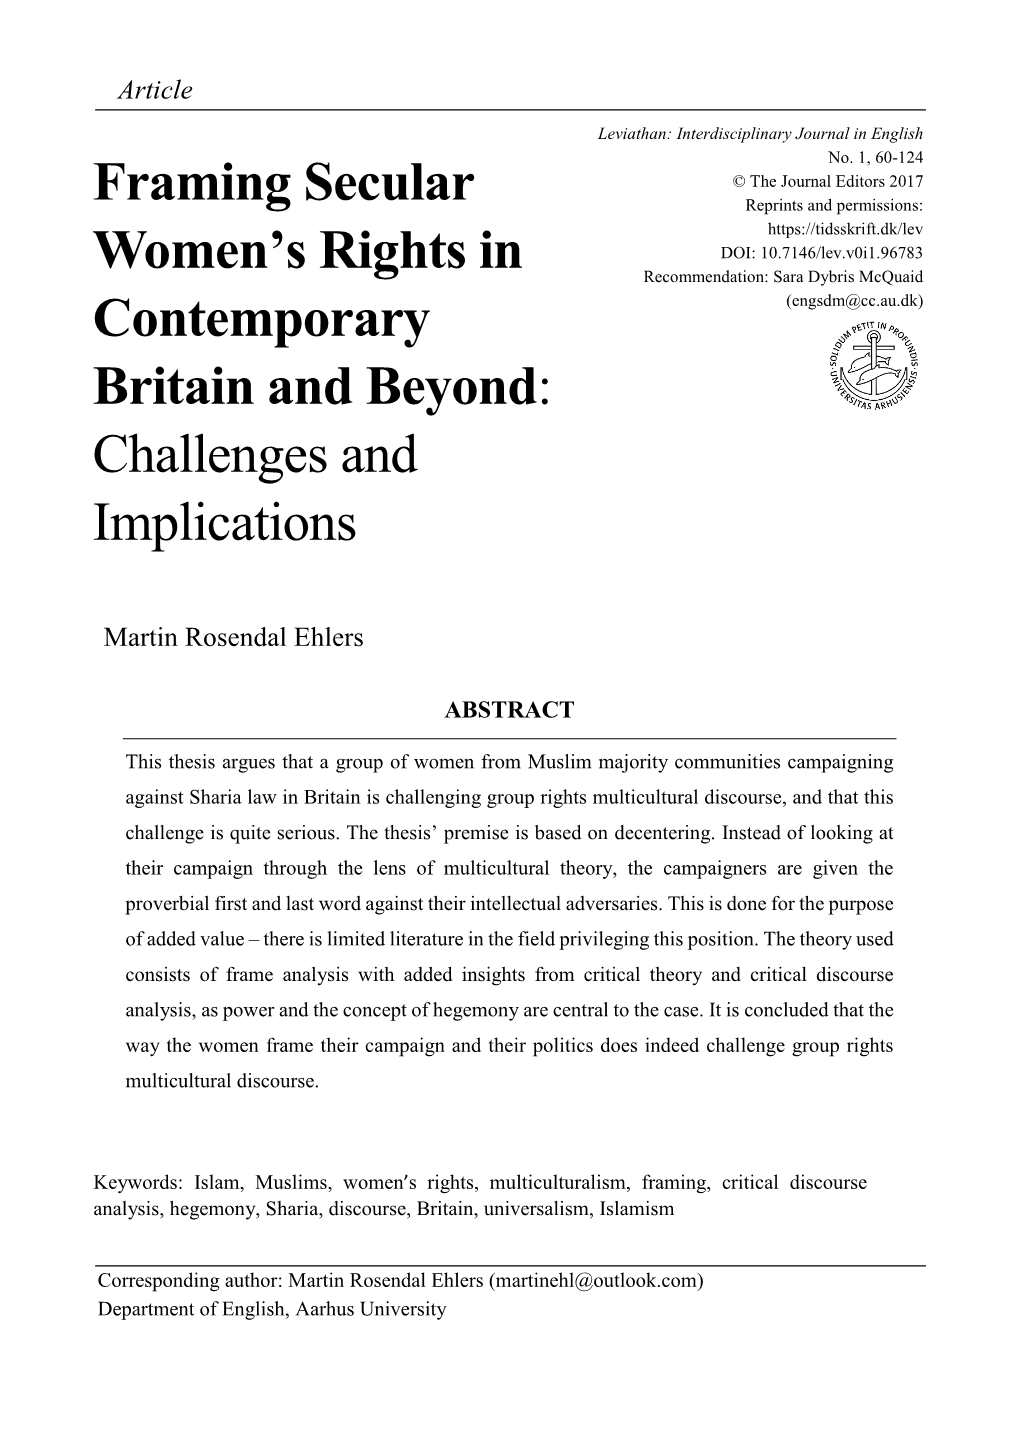 Framing Secular Women's Rights in Contemporary Britain